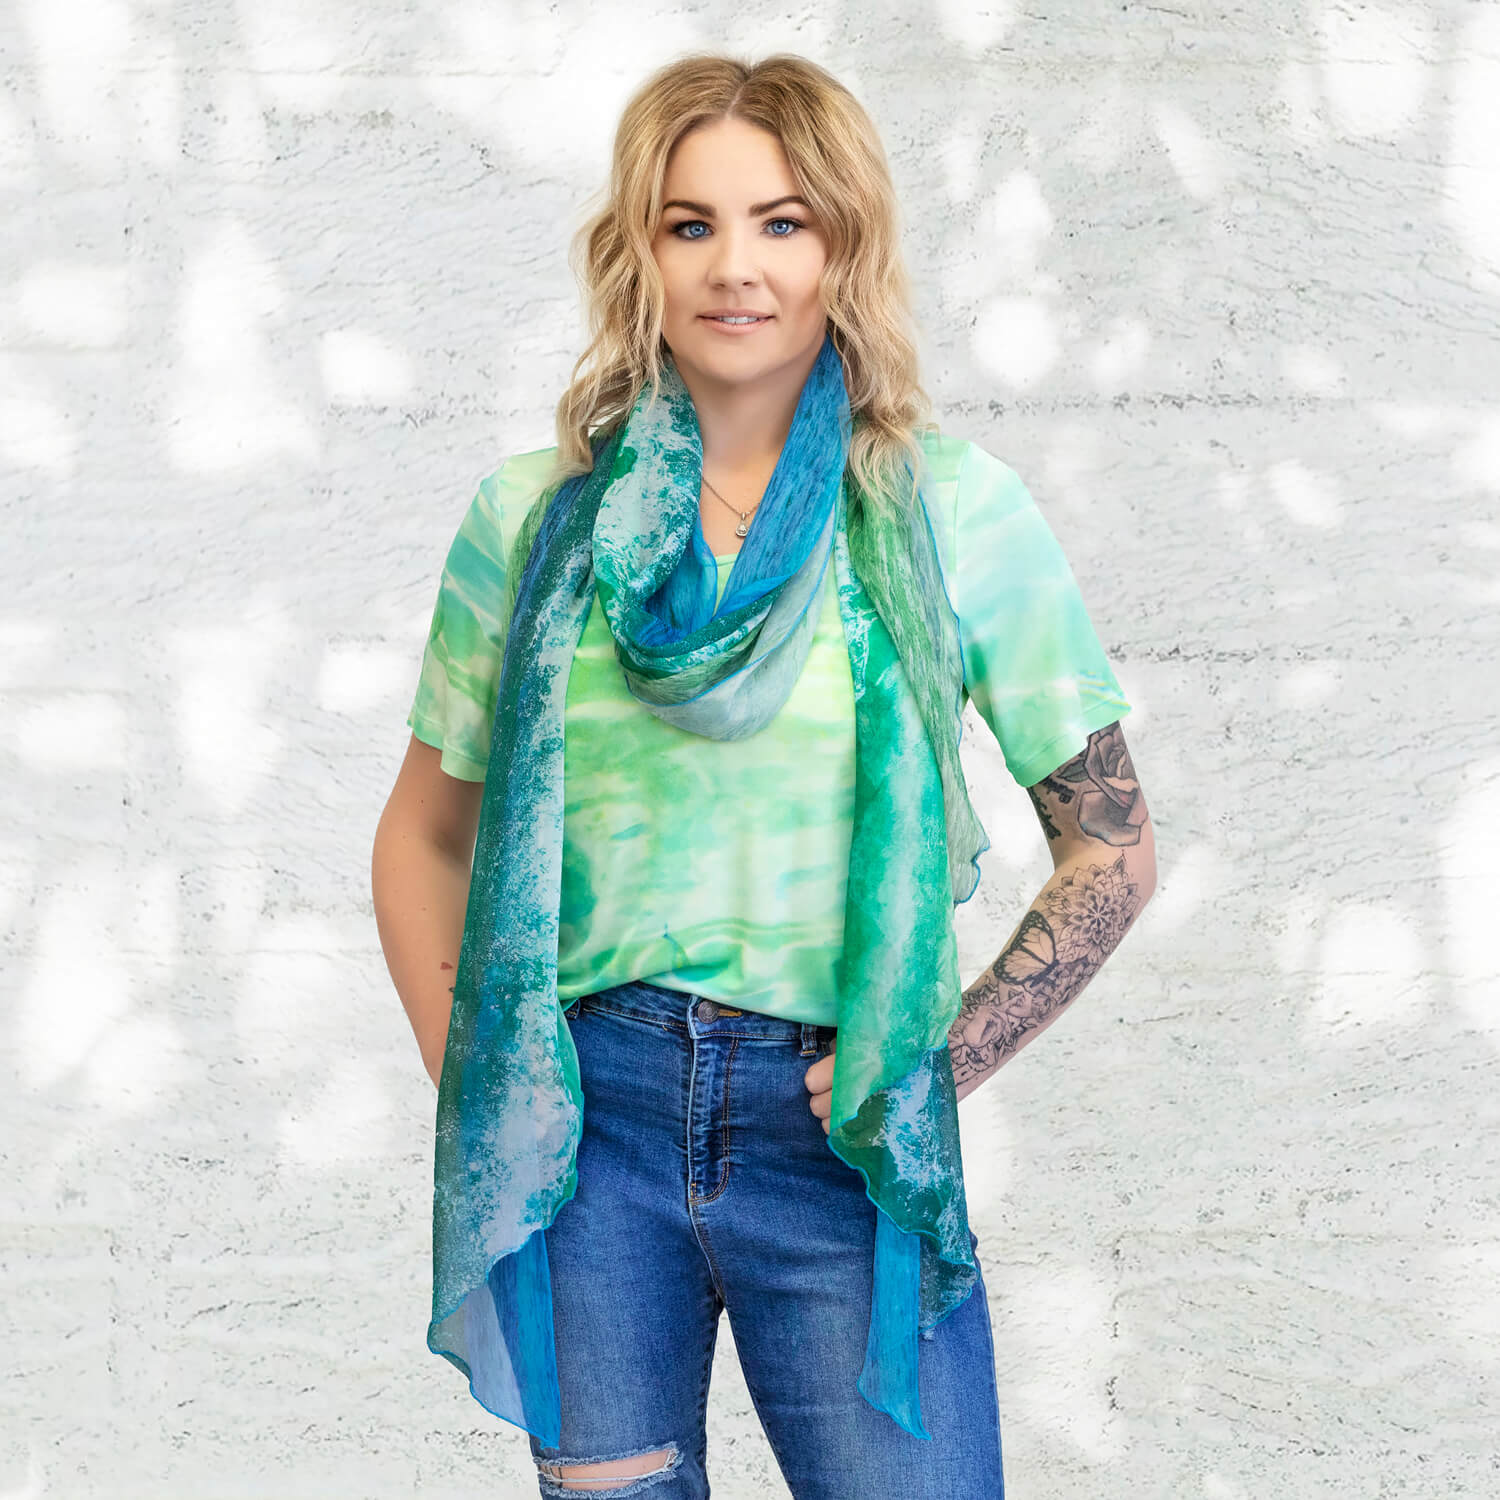 crystal wave silk scarf with green top by seahorse silks